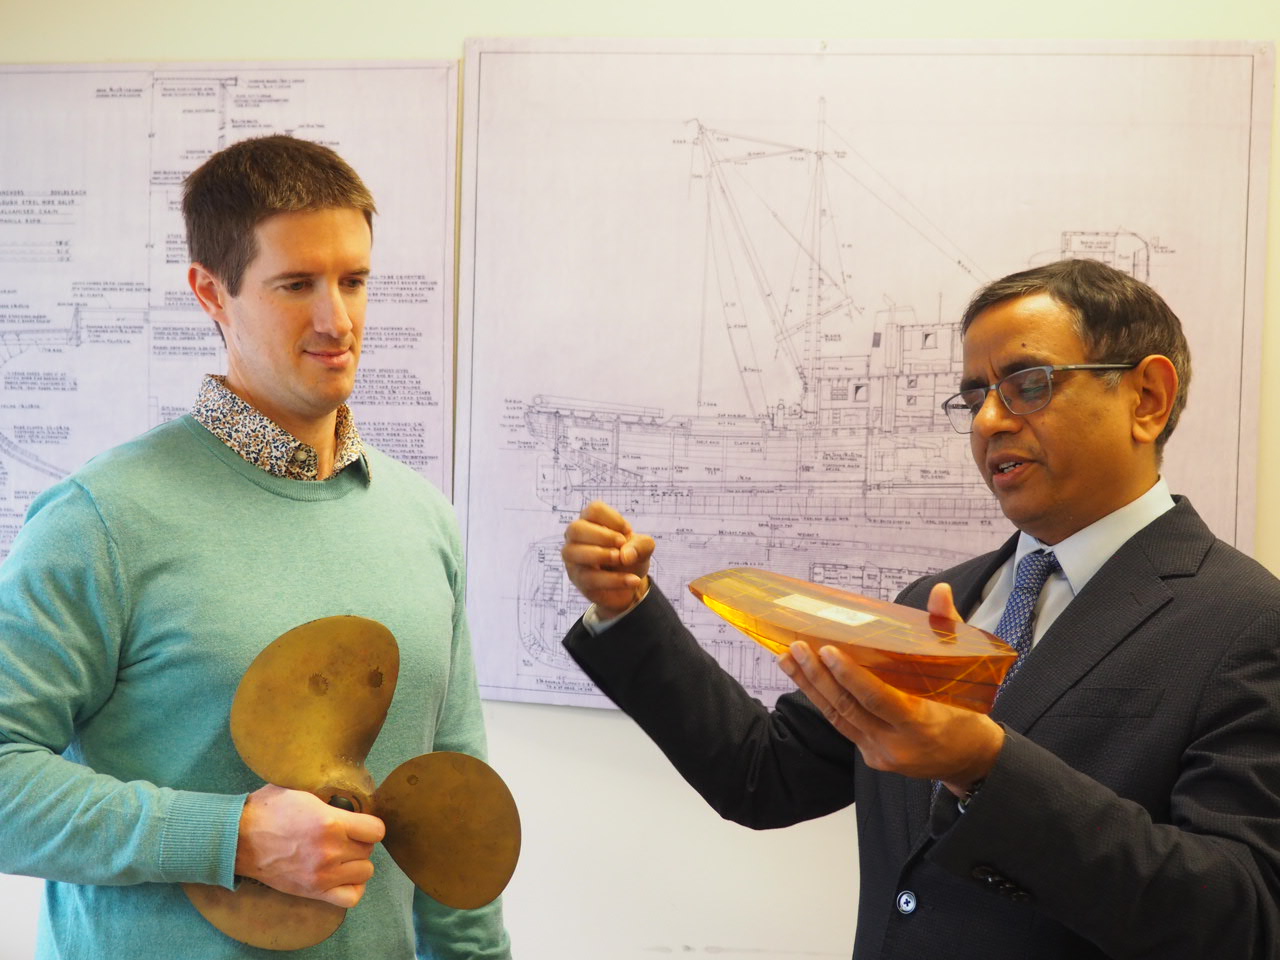 Two researchers look at ship model, while one holds propeller model